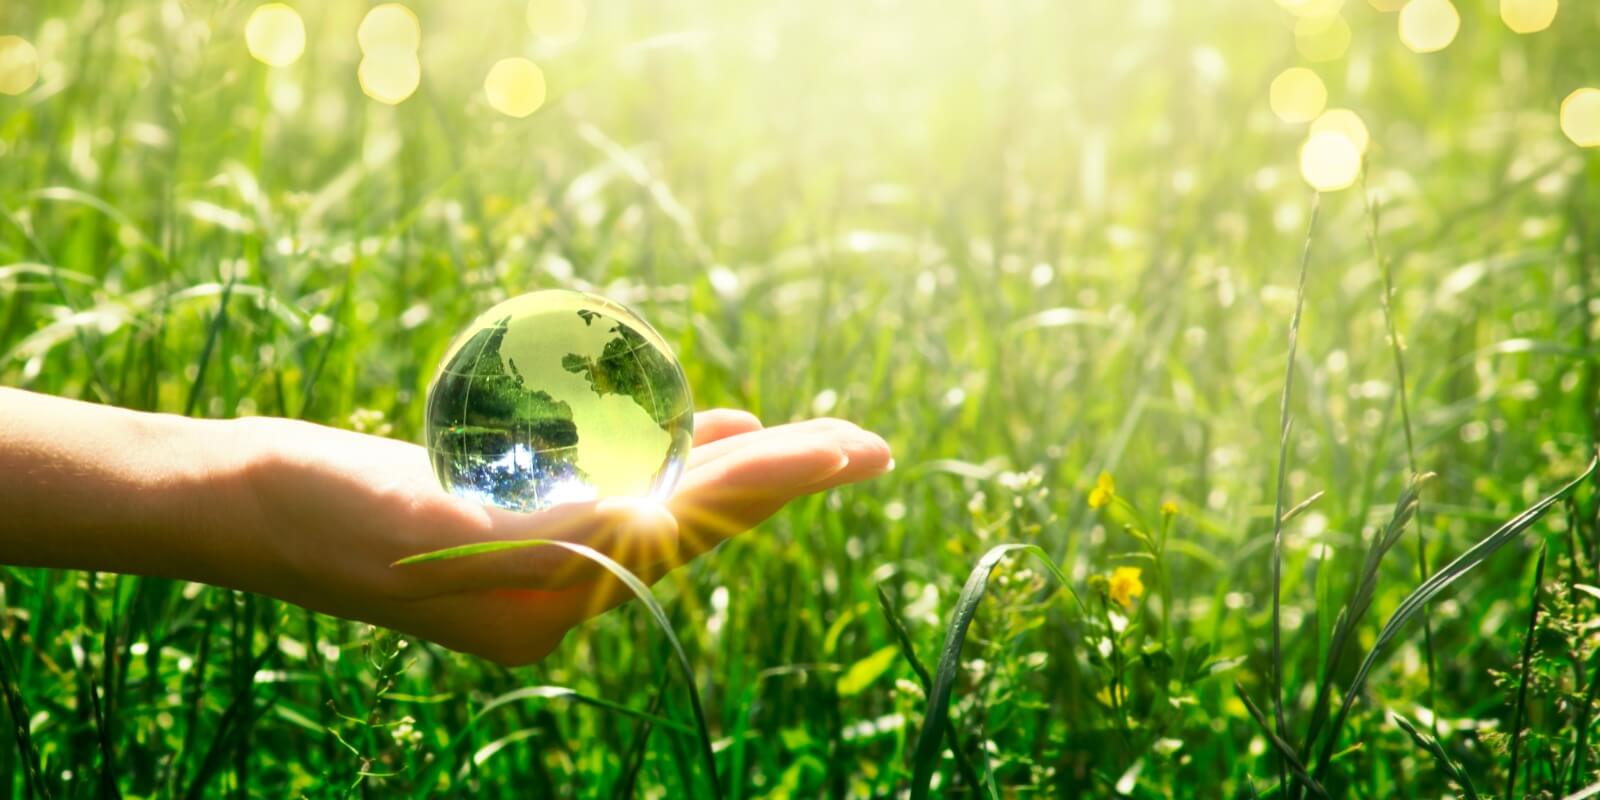 Crystal Clear Globe with Green Grass